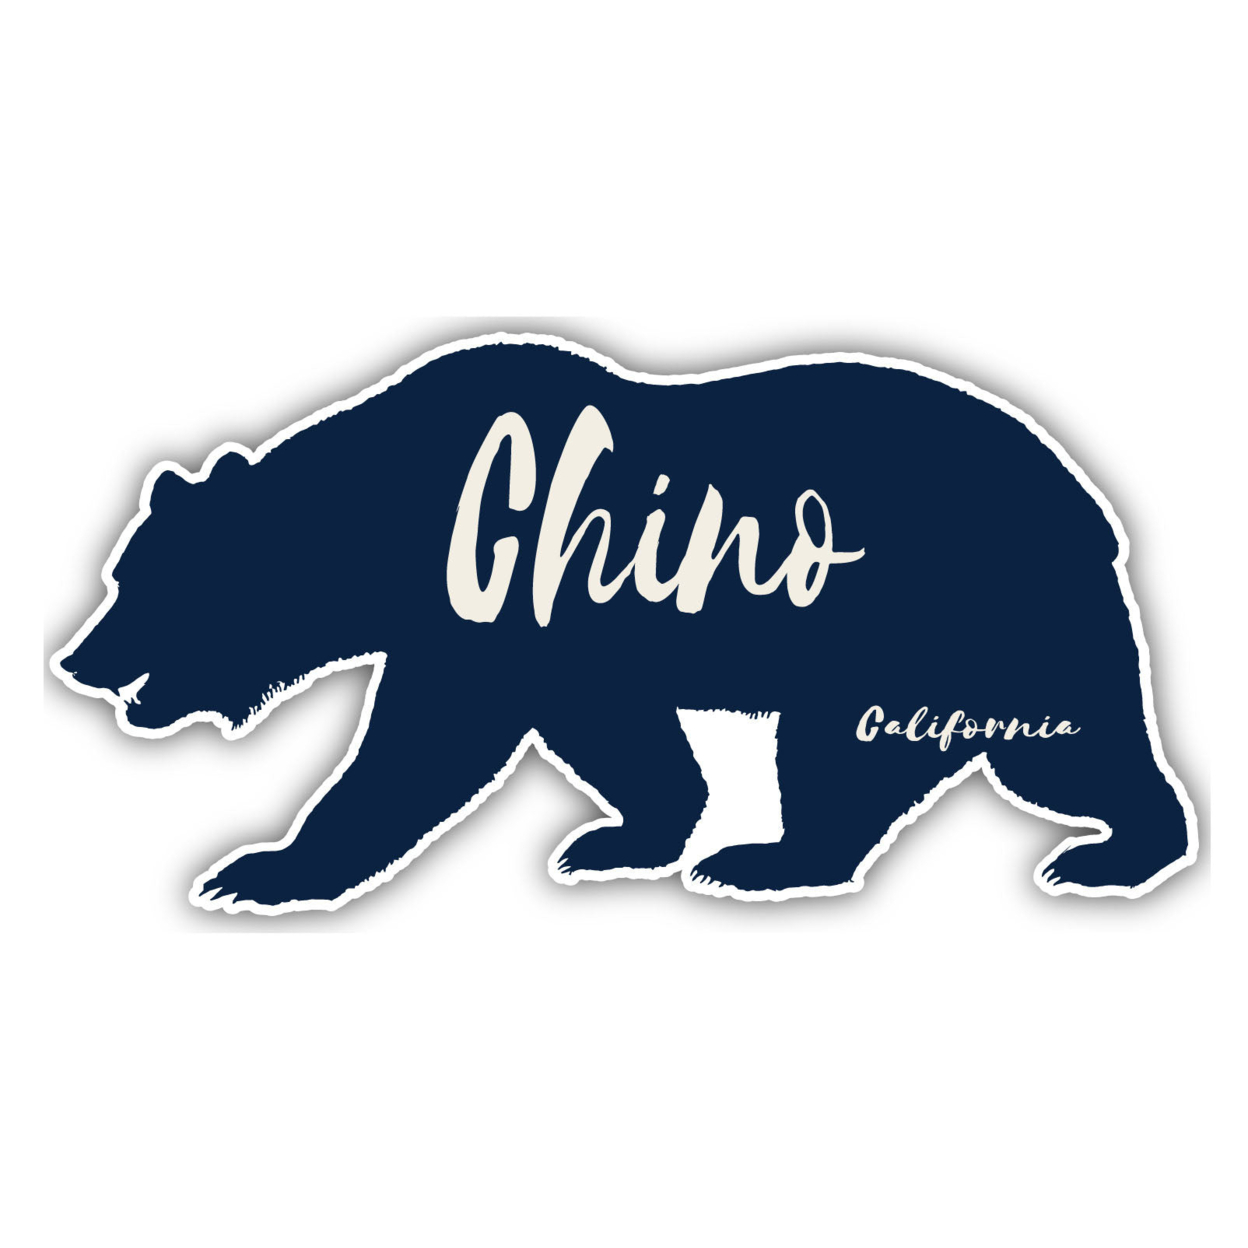 Chino California Souvenir Decorative Stickers (Choose Theme And Size) - 4-Pack, 6-Inch, Bear